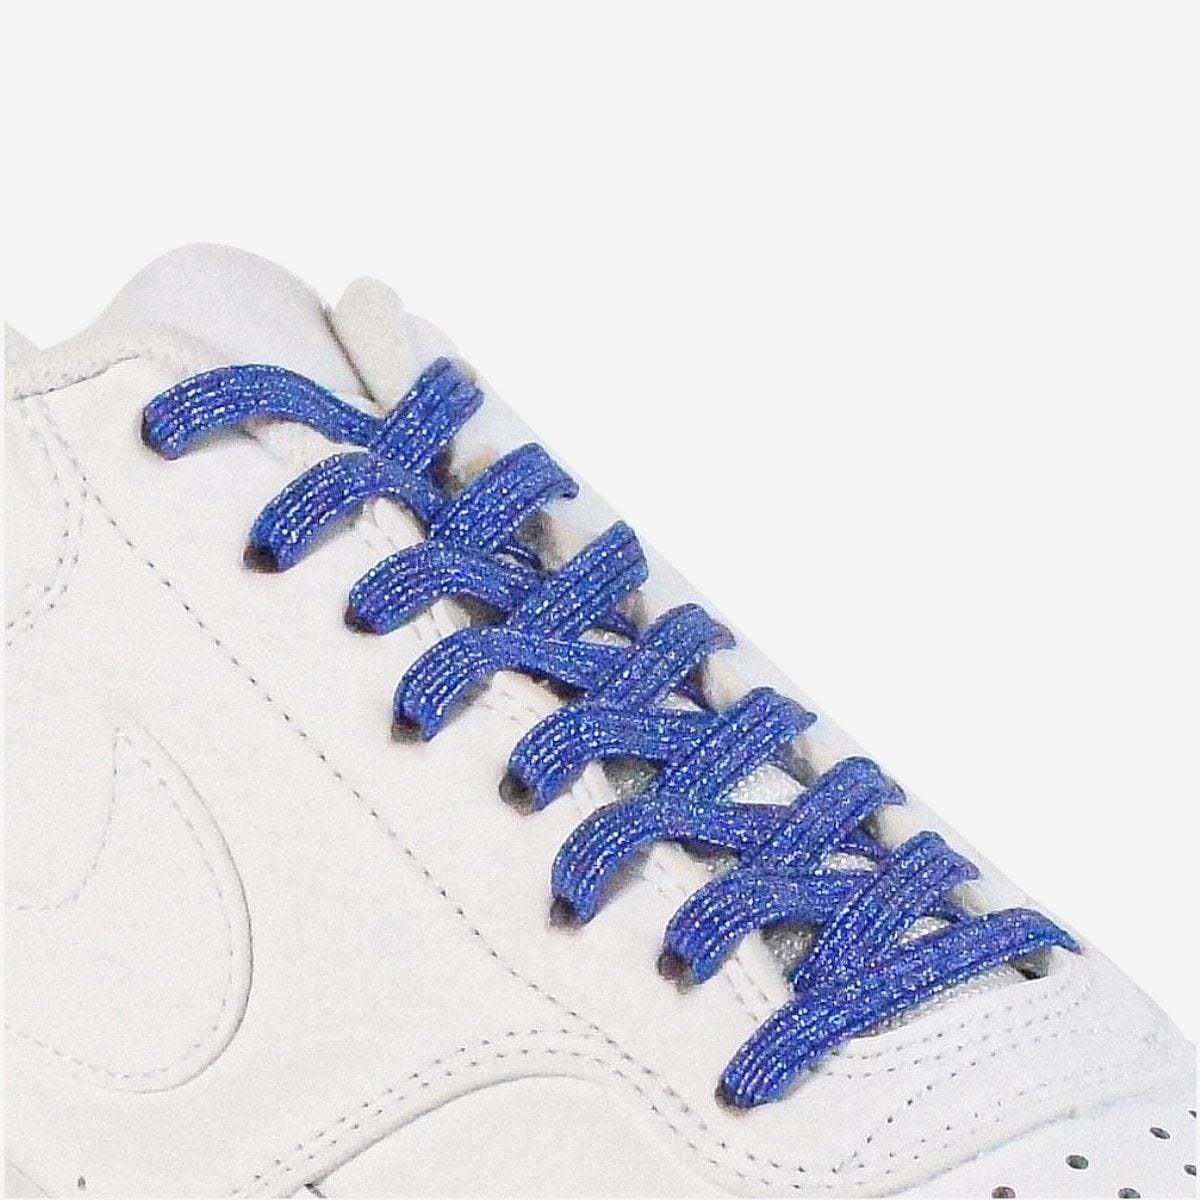 different-ways-to-lace-shoes-with-royal-blue-elastic-shoelaces-on-white-kicks